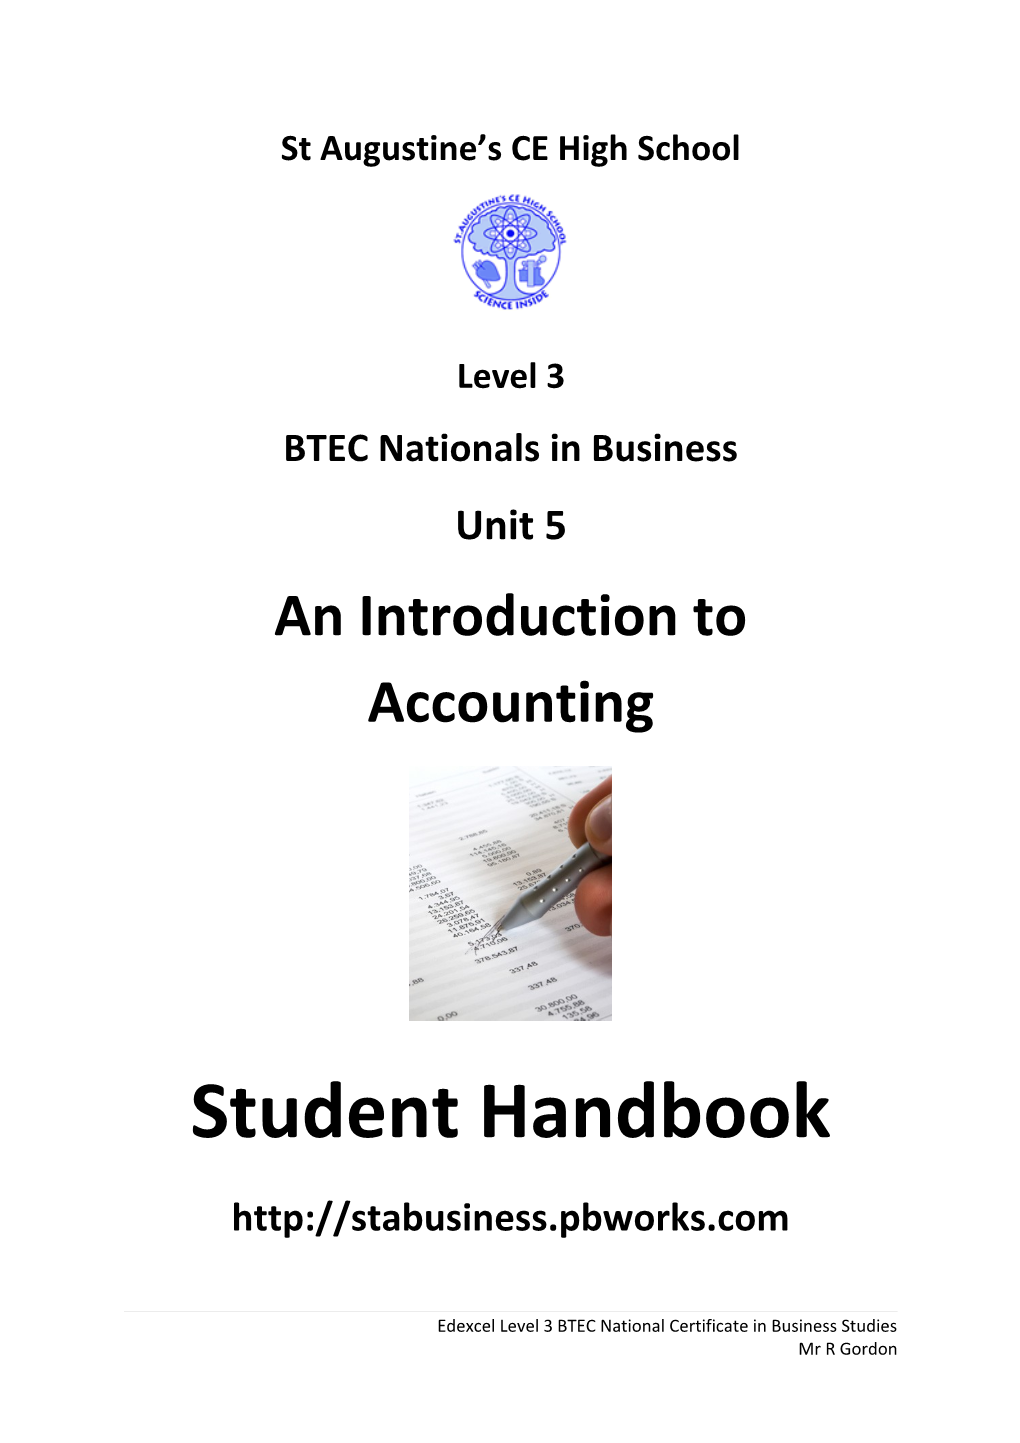 BTEC Nationals in Business